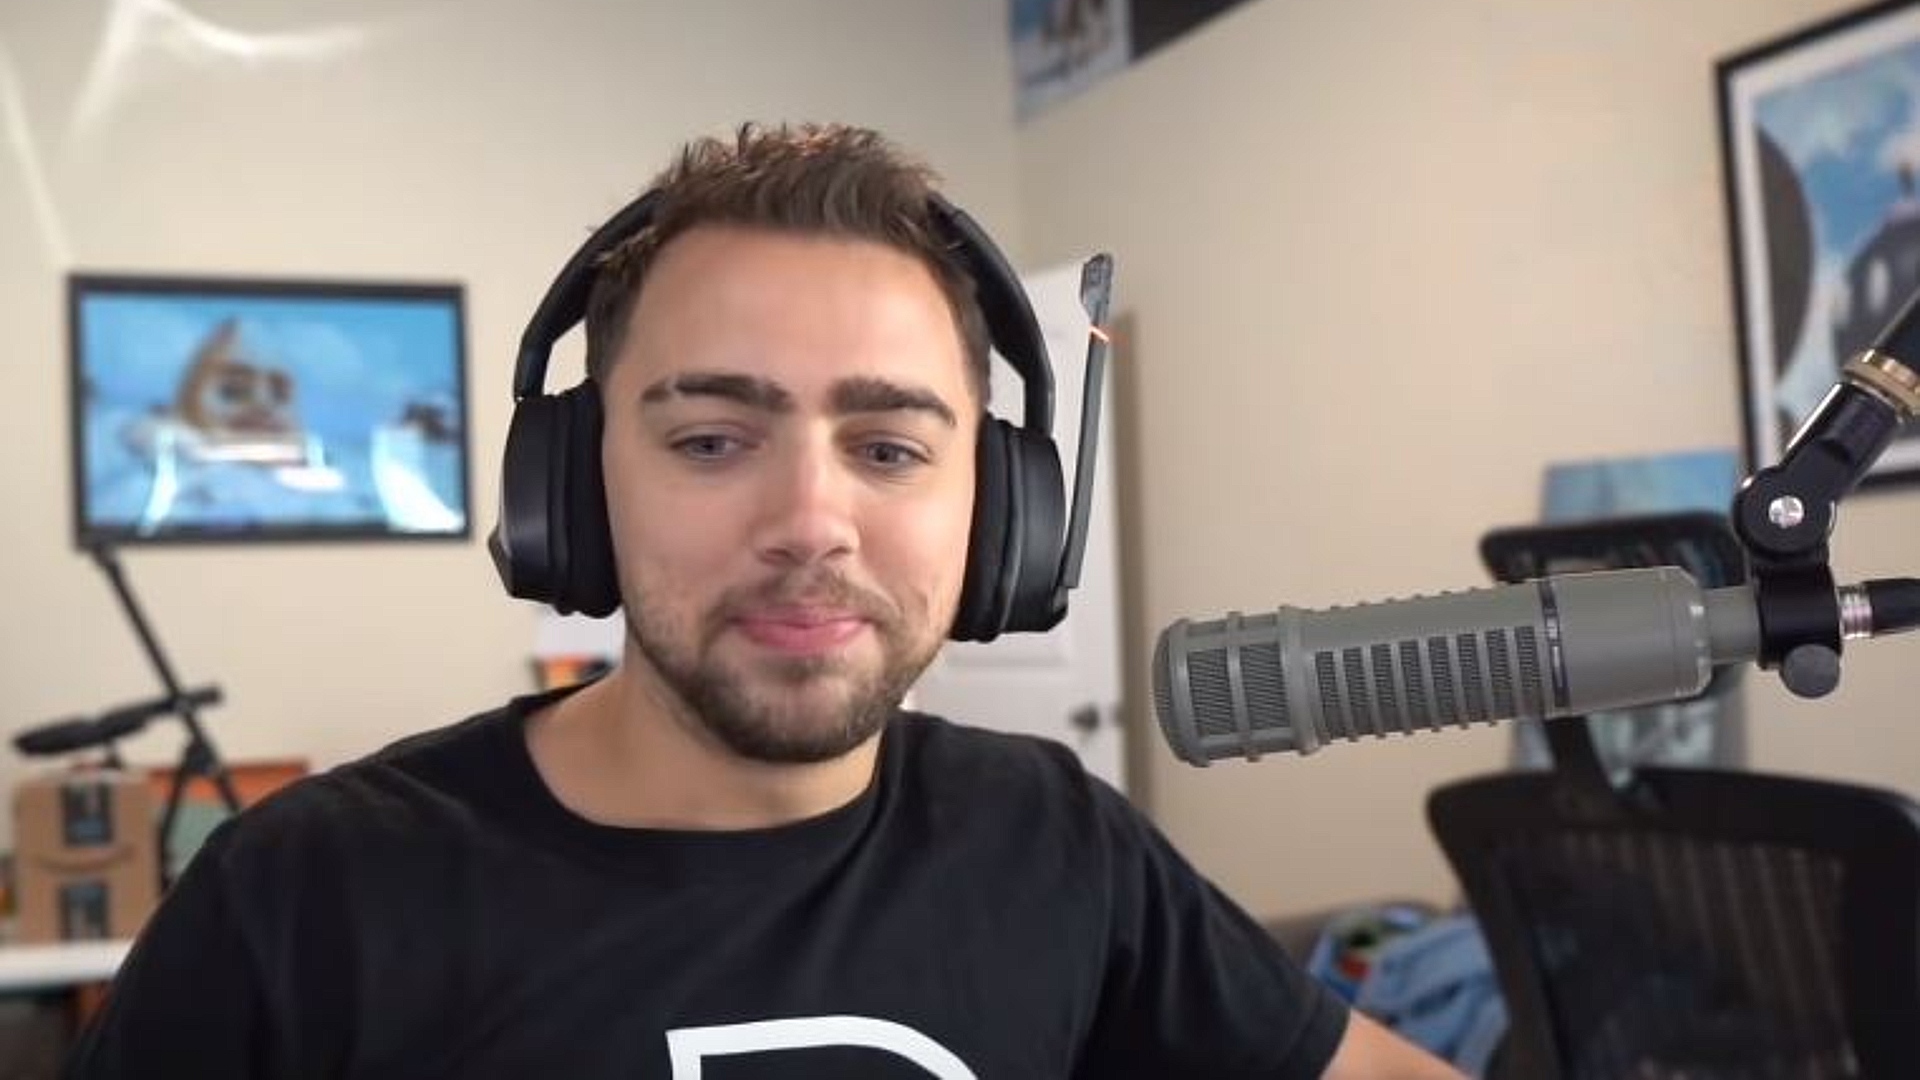 Mizkif viewers donate more than 5,000 while he sleeps on